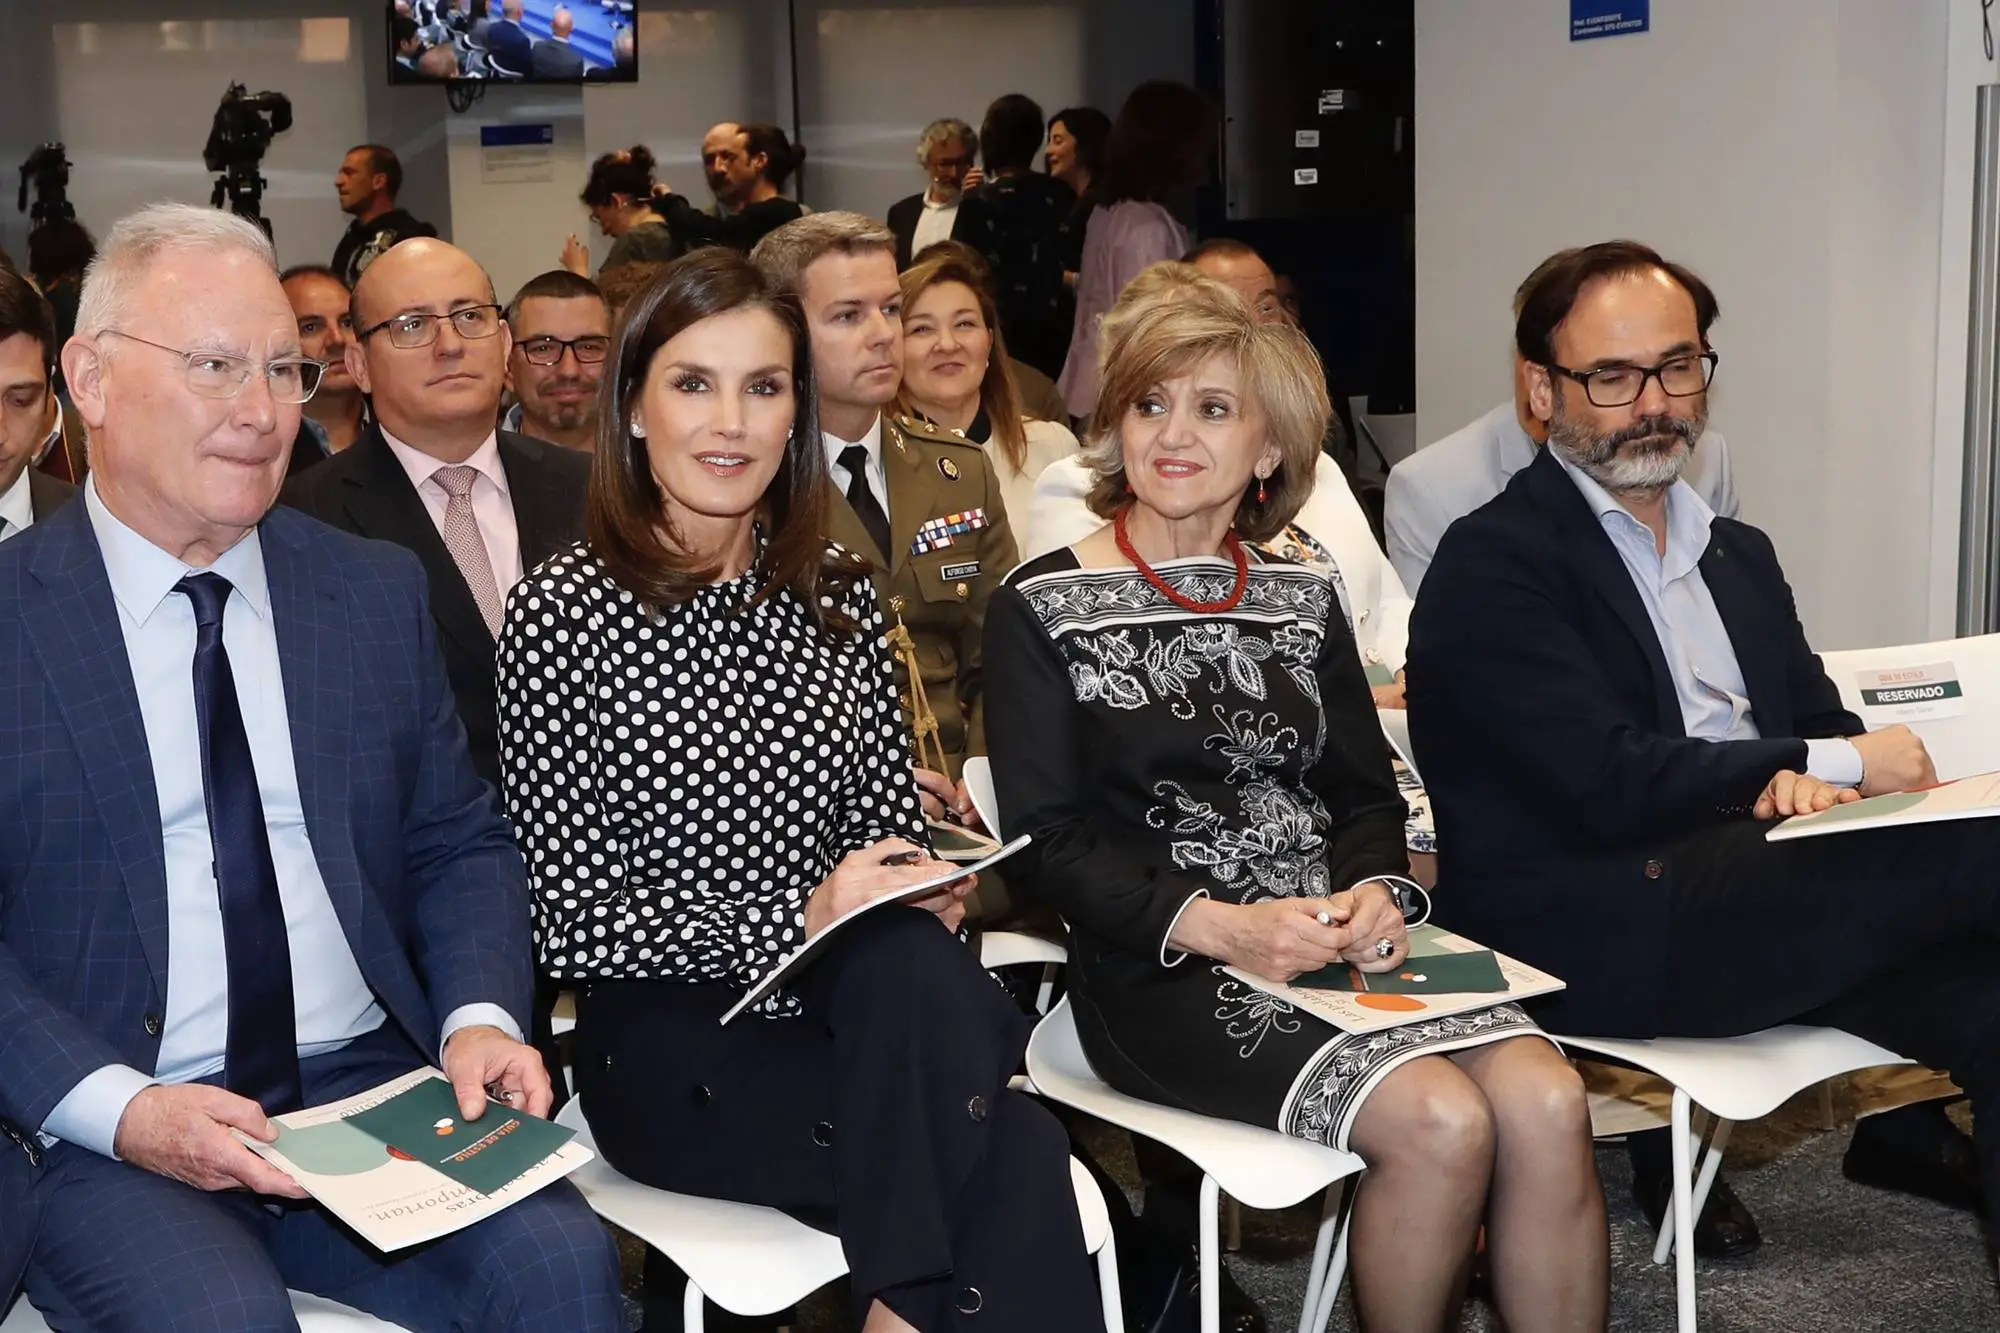 Queen Letizia at Media and Mental Health Conference